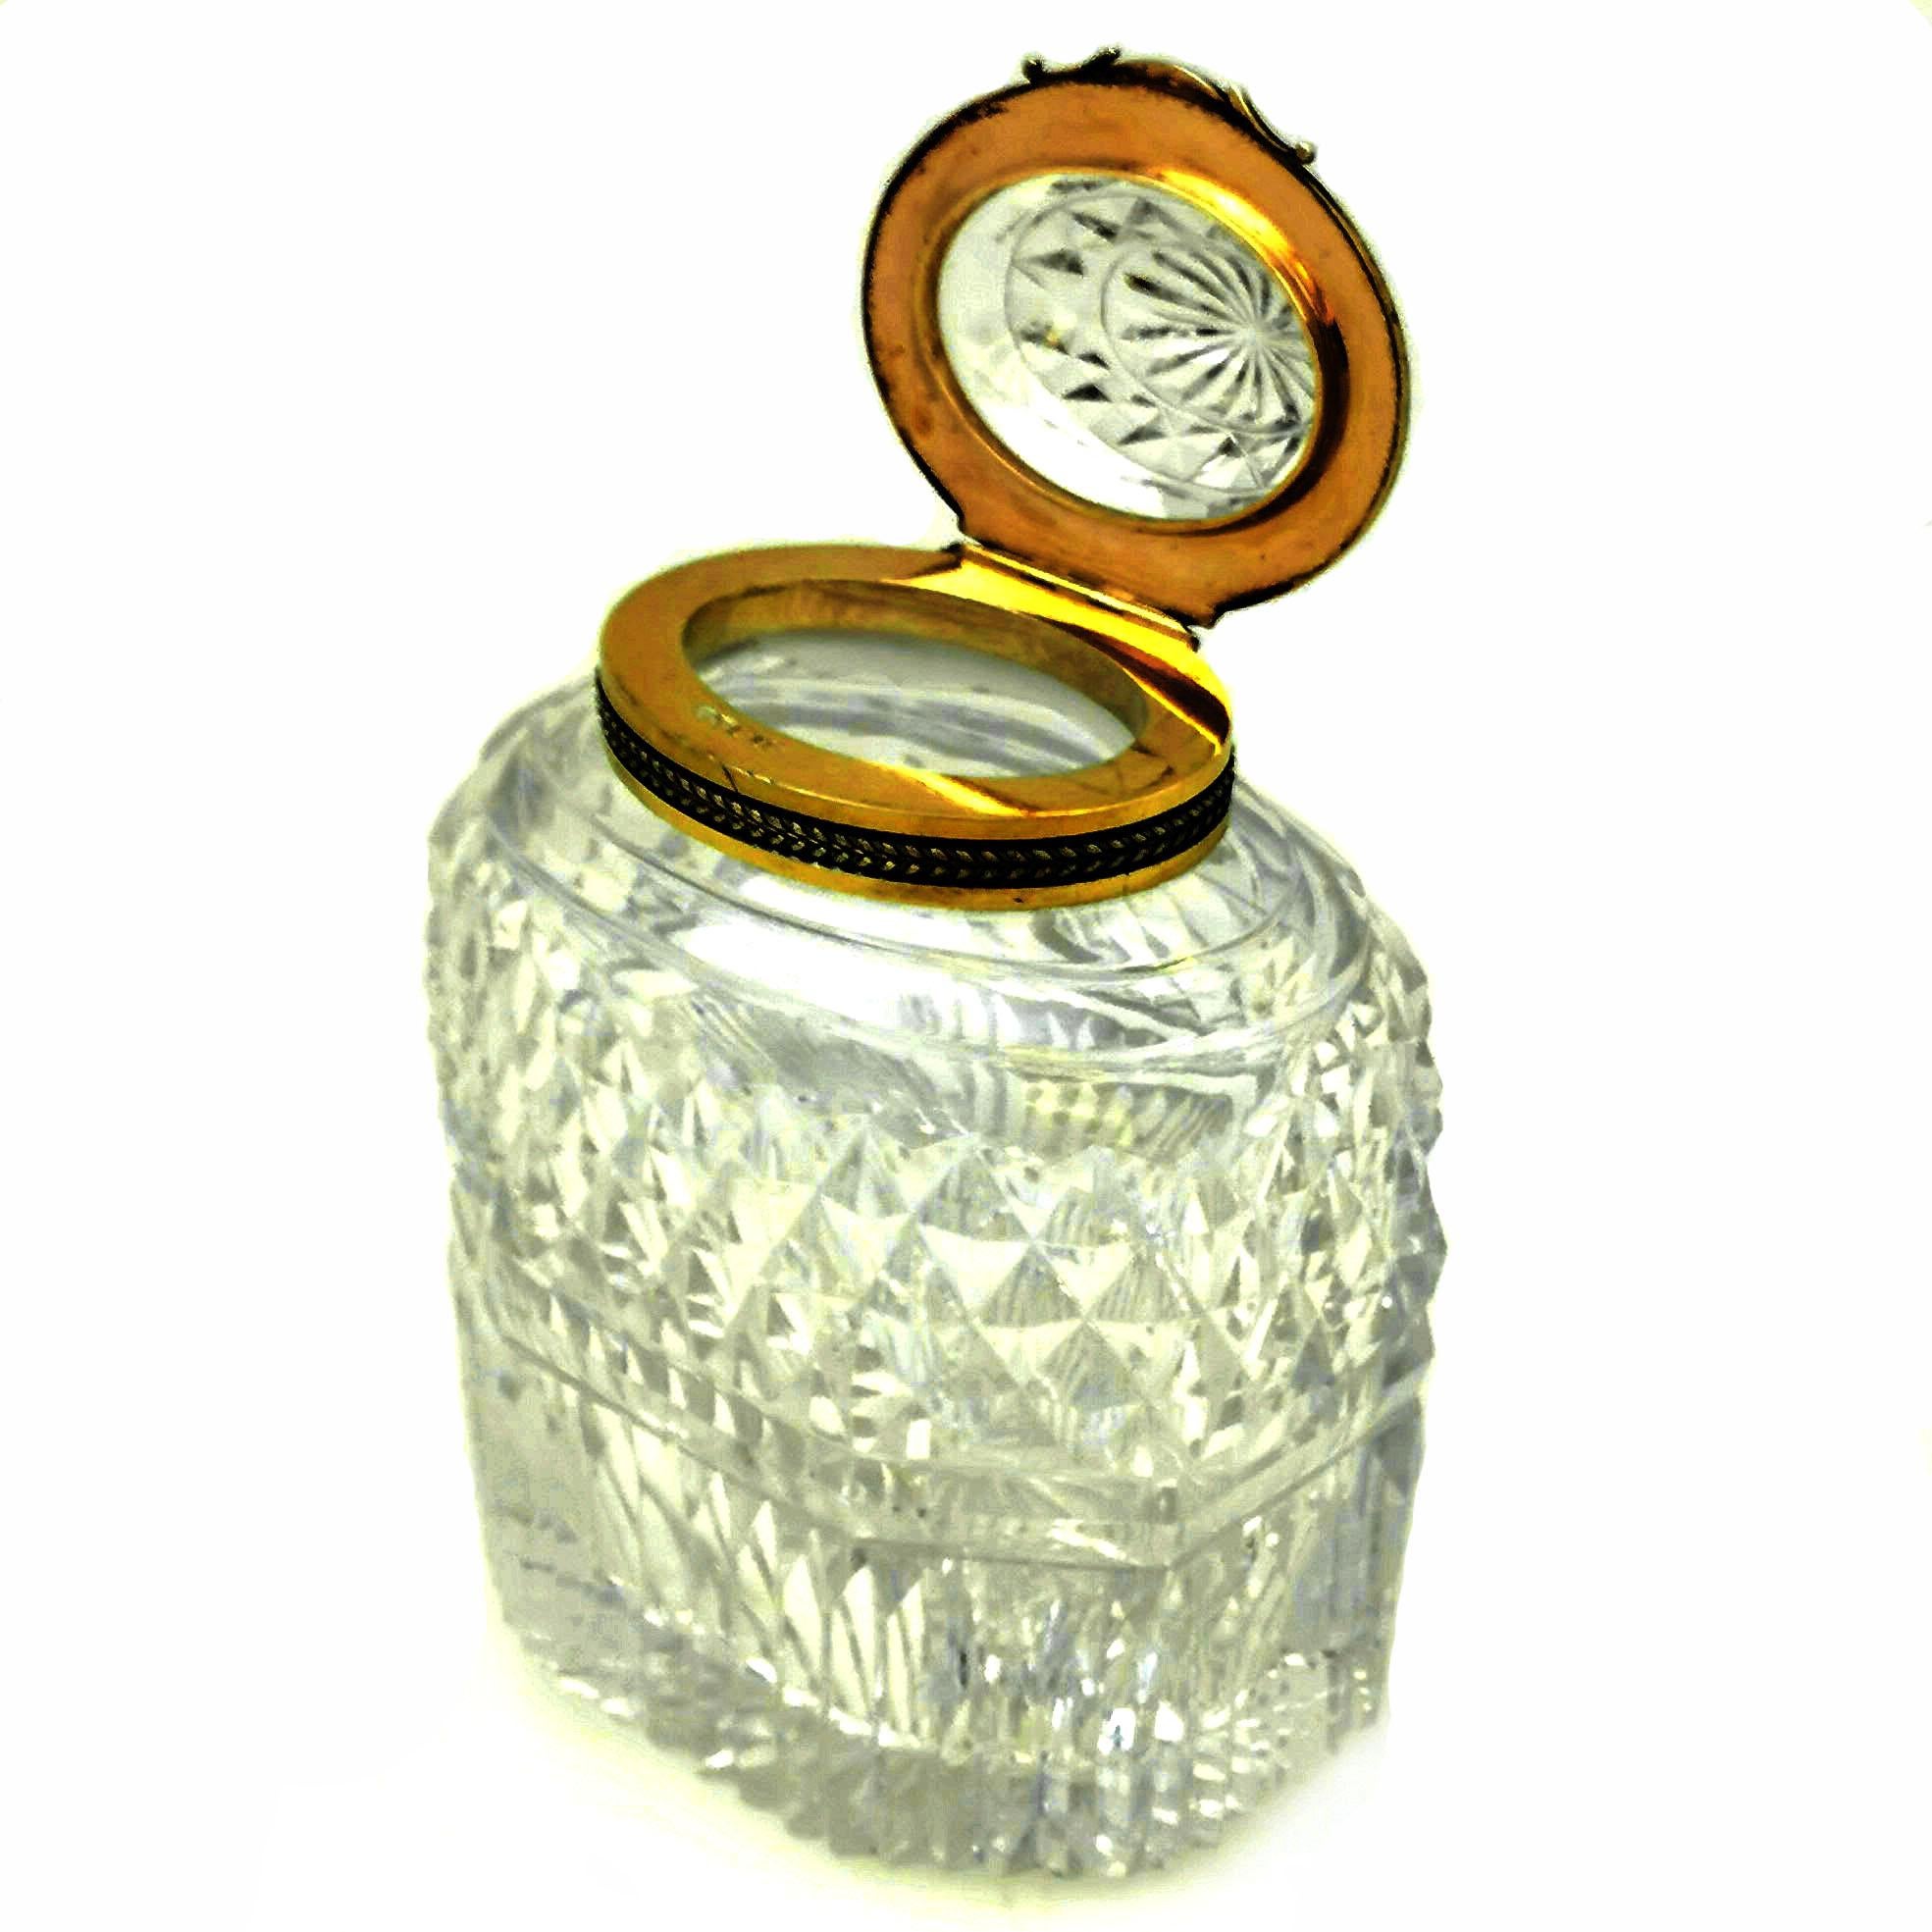 A beautiful Antique Georgian silver mounted cut glass Tea Caddy. This Georgian Tea Caddy has a hinged glass lid and the body and lid both have a silver gilt mounts.

Made in London in 1803 by R. Cooke.

Approx Height - 15.2cm
Approx. Length -